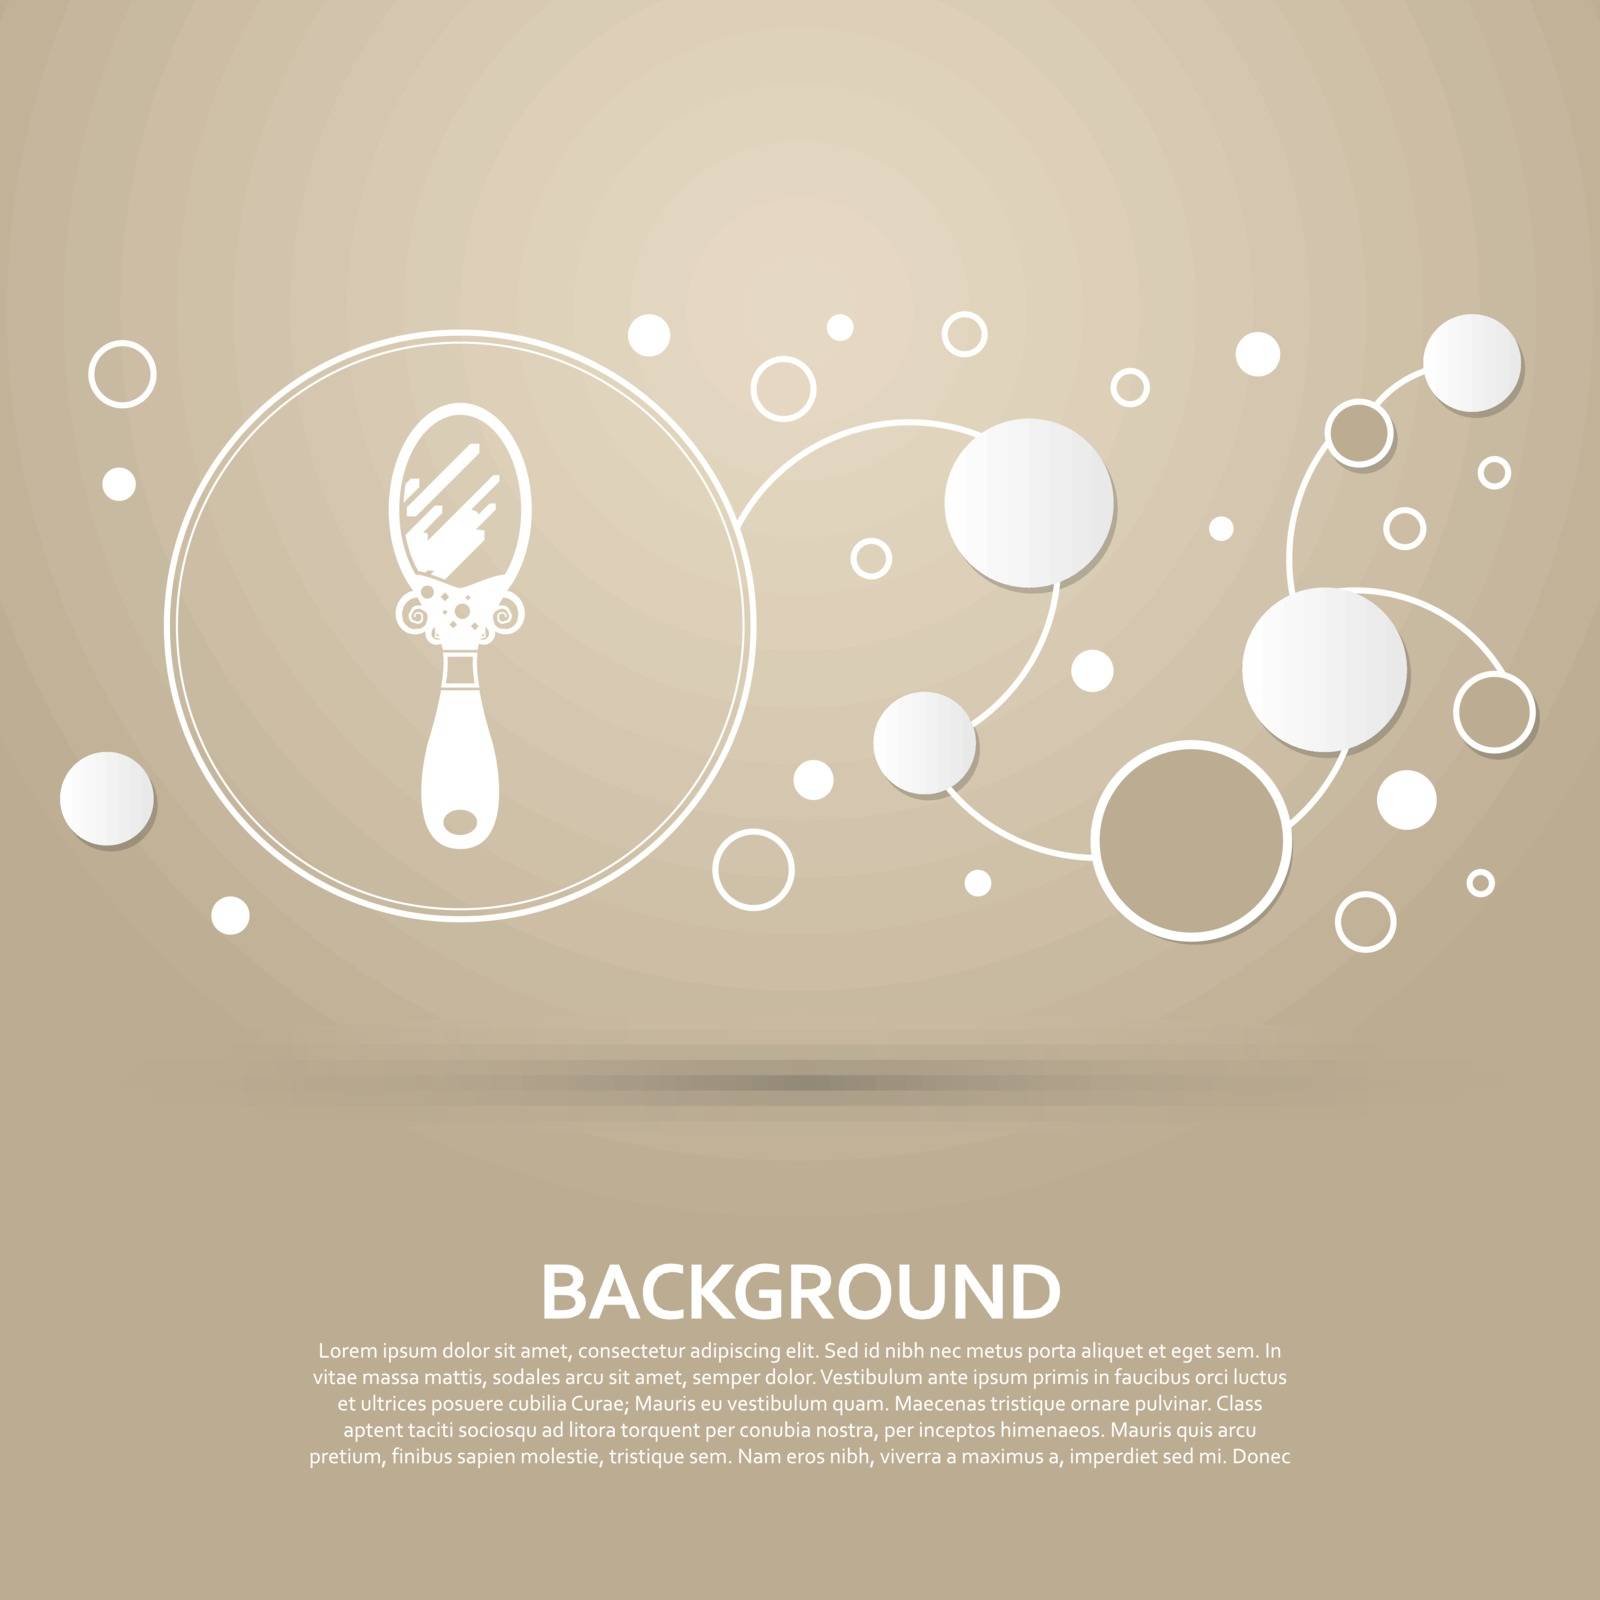 mirror icon on a brown background with elegant style and modern design infographic. Vector by Adamchuk